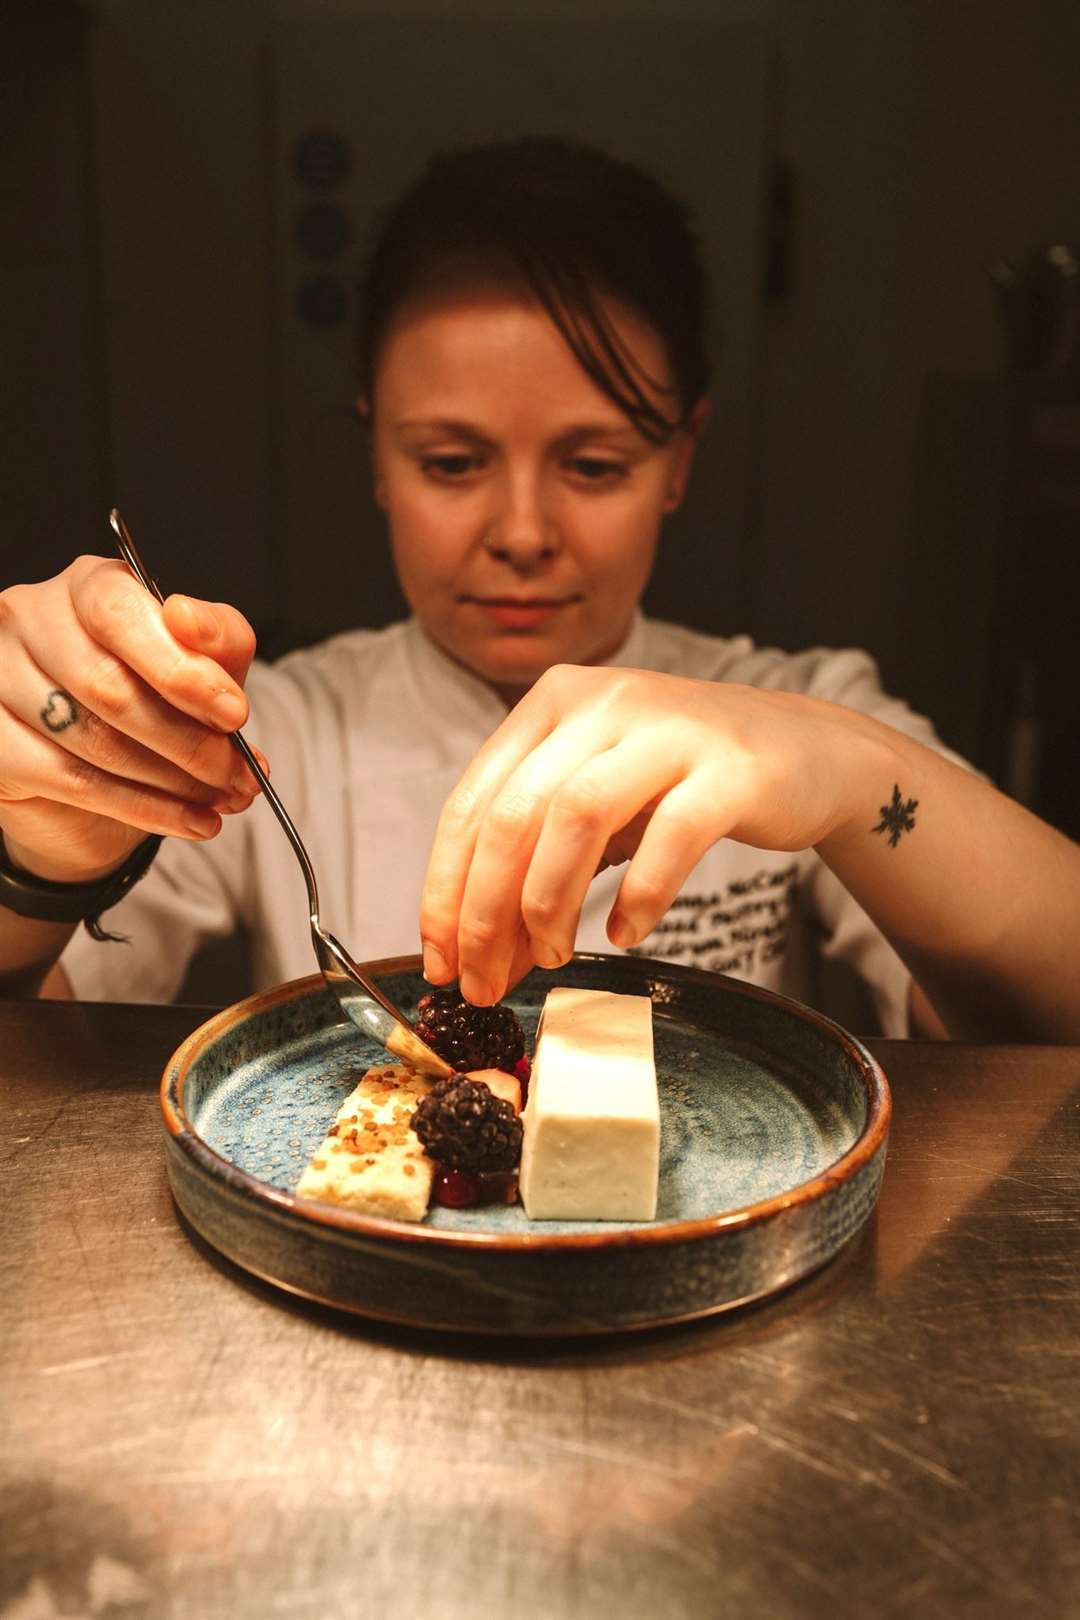 Alanna works on one of her culinary delights. She won two silver awards at an international competition recently.